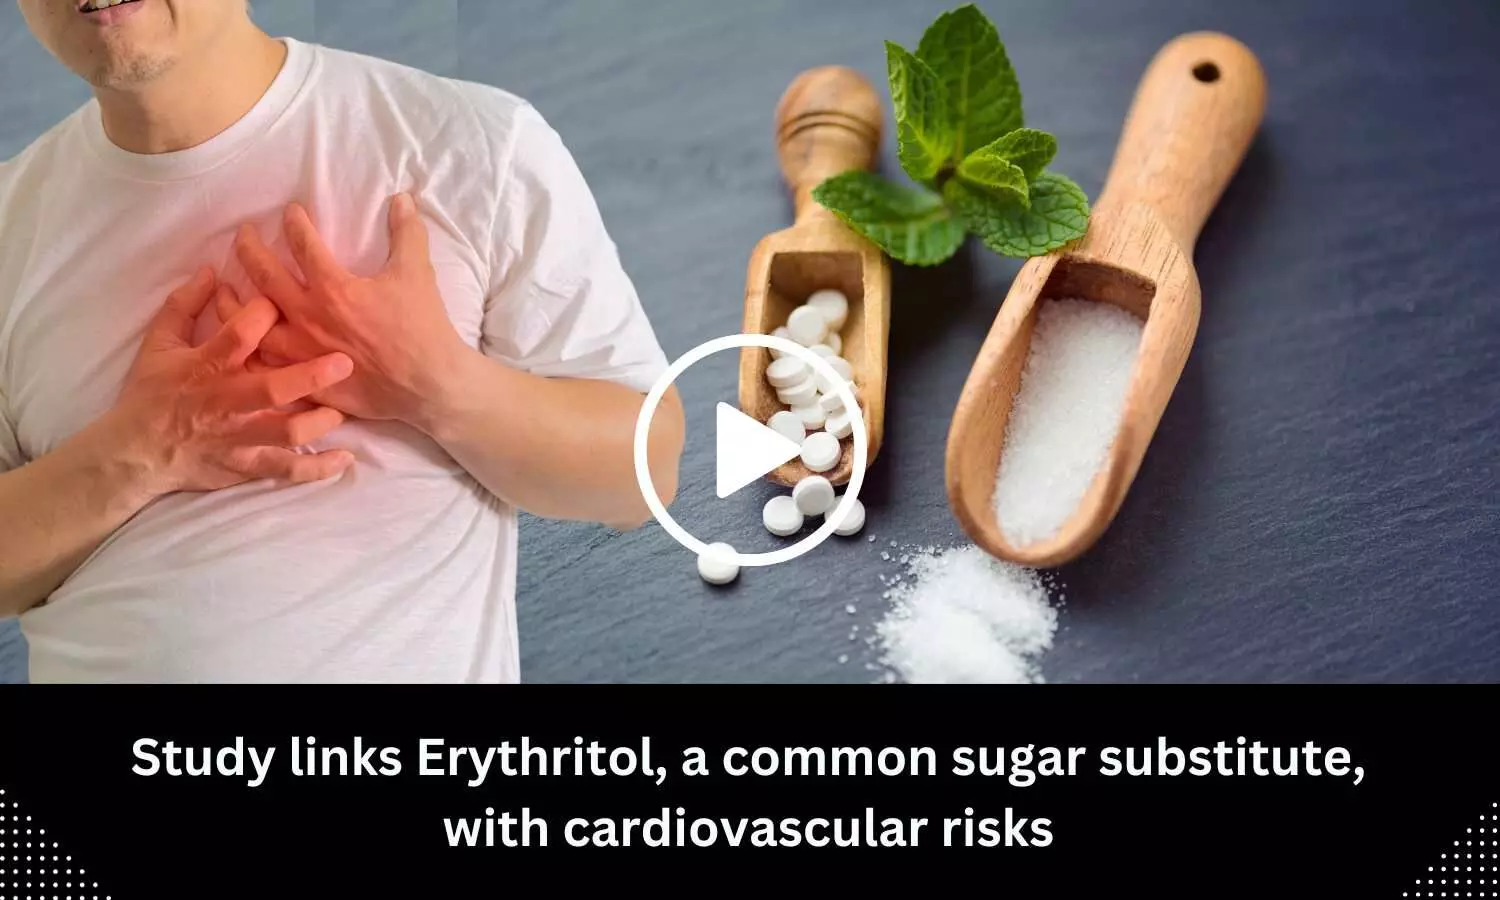 Study links Erythritol, a common sugar substitute, with cardiovascular risks